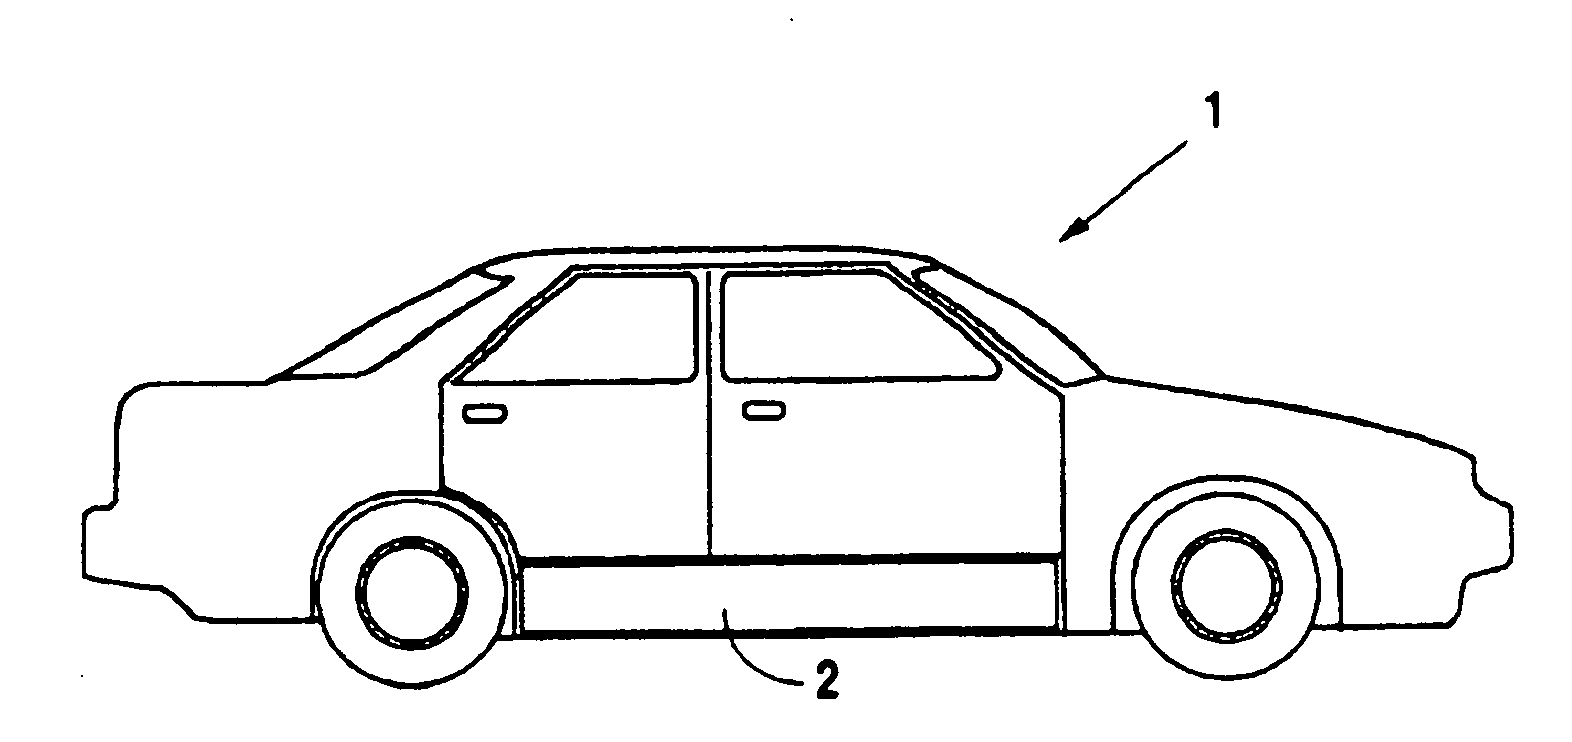 Hybrid electric vehicle chassis with removable battery module